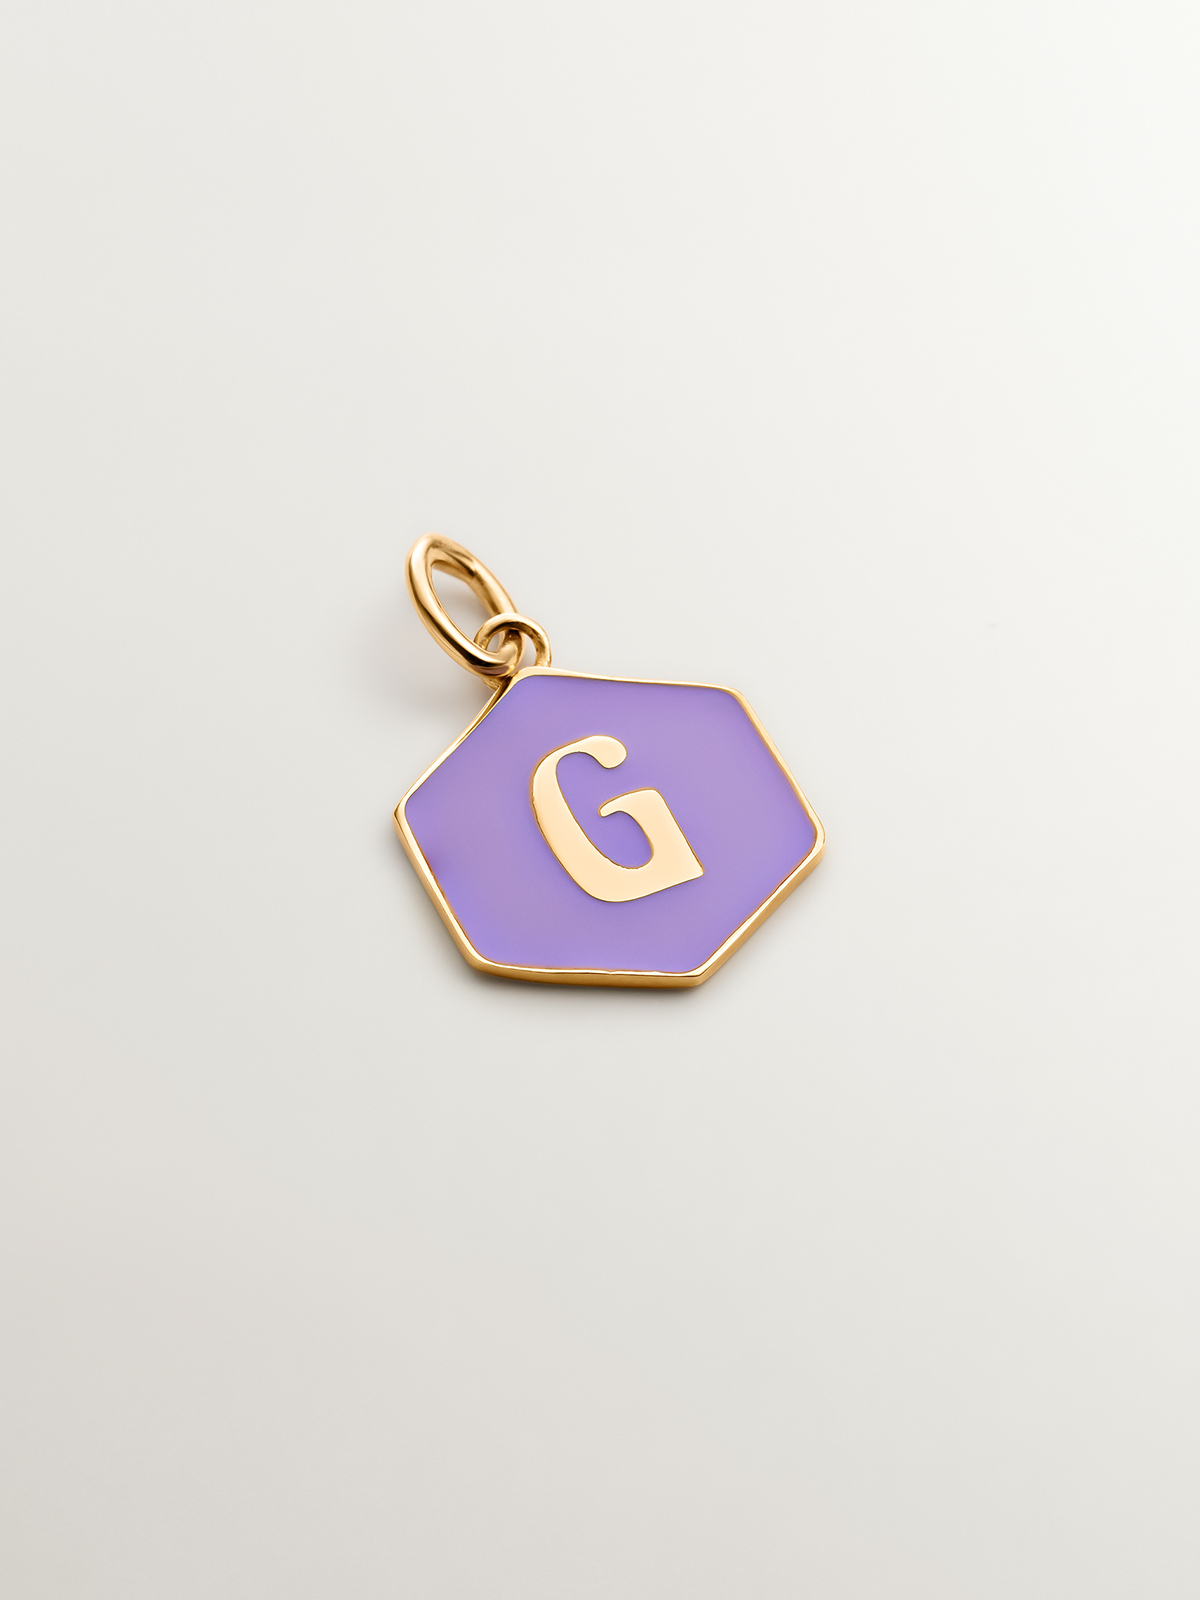 18K yellow gold plated 925 sterling silver charm with initial G and lilac enamel with hexagonal shape